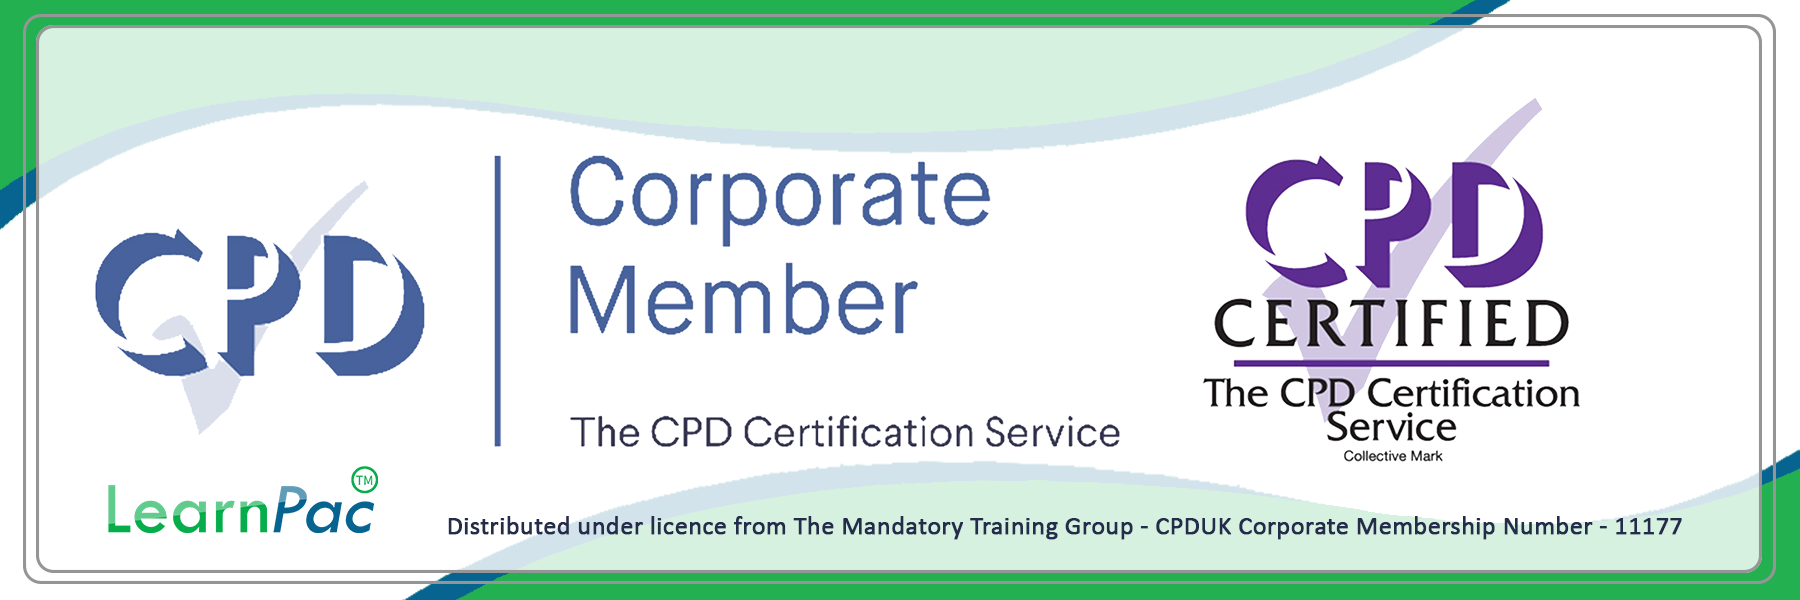 Care Staff Training Courses - E-Learning Courses with Certificates - CPD Certified - LearnPac Systems UK -